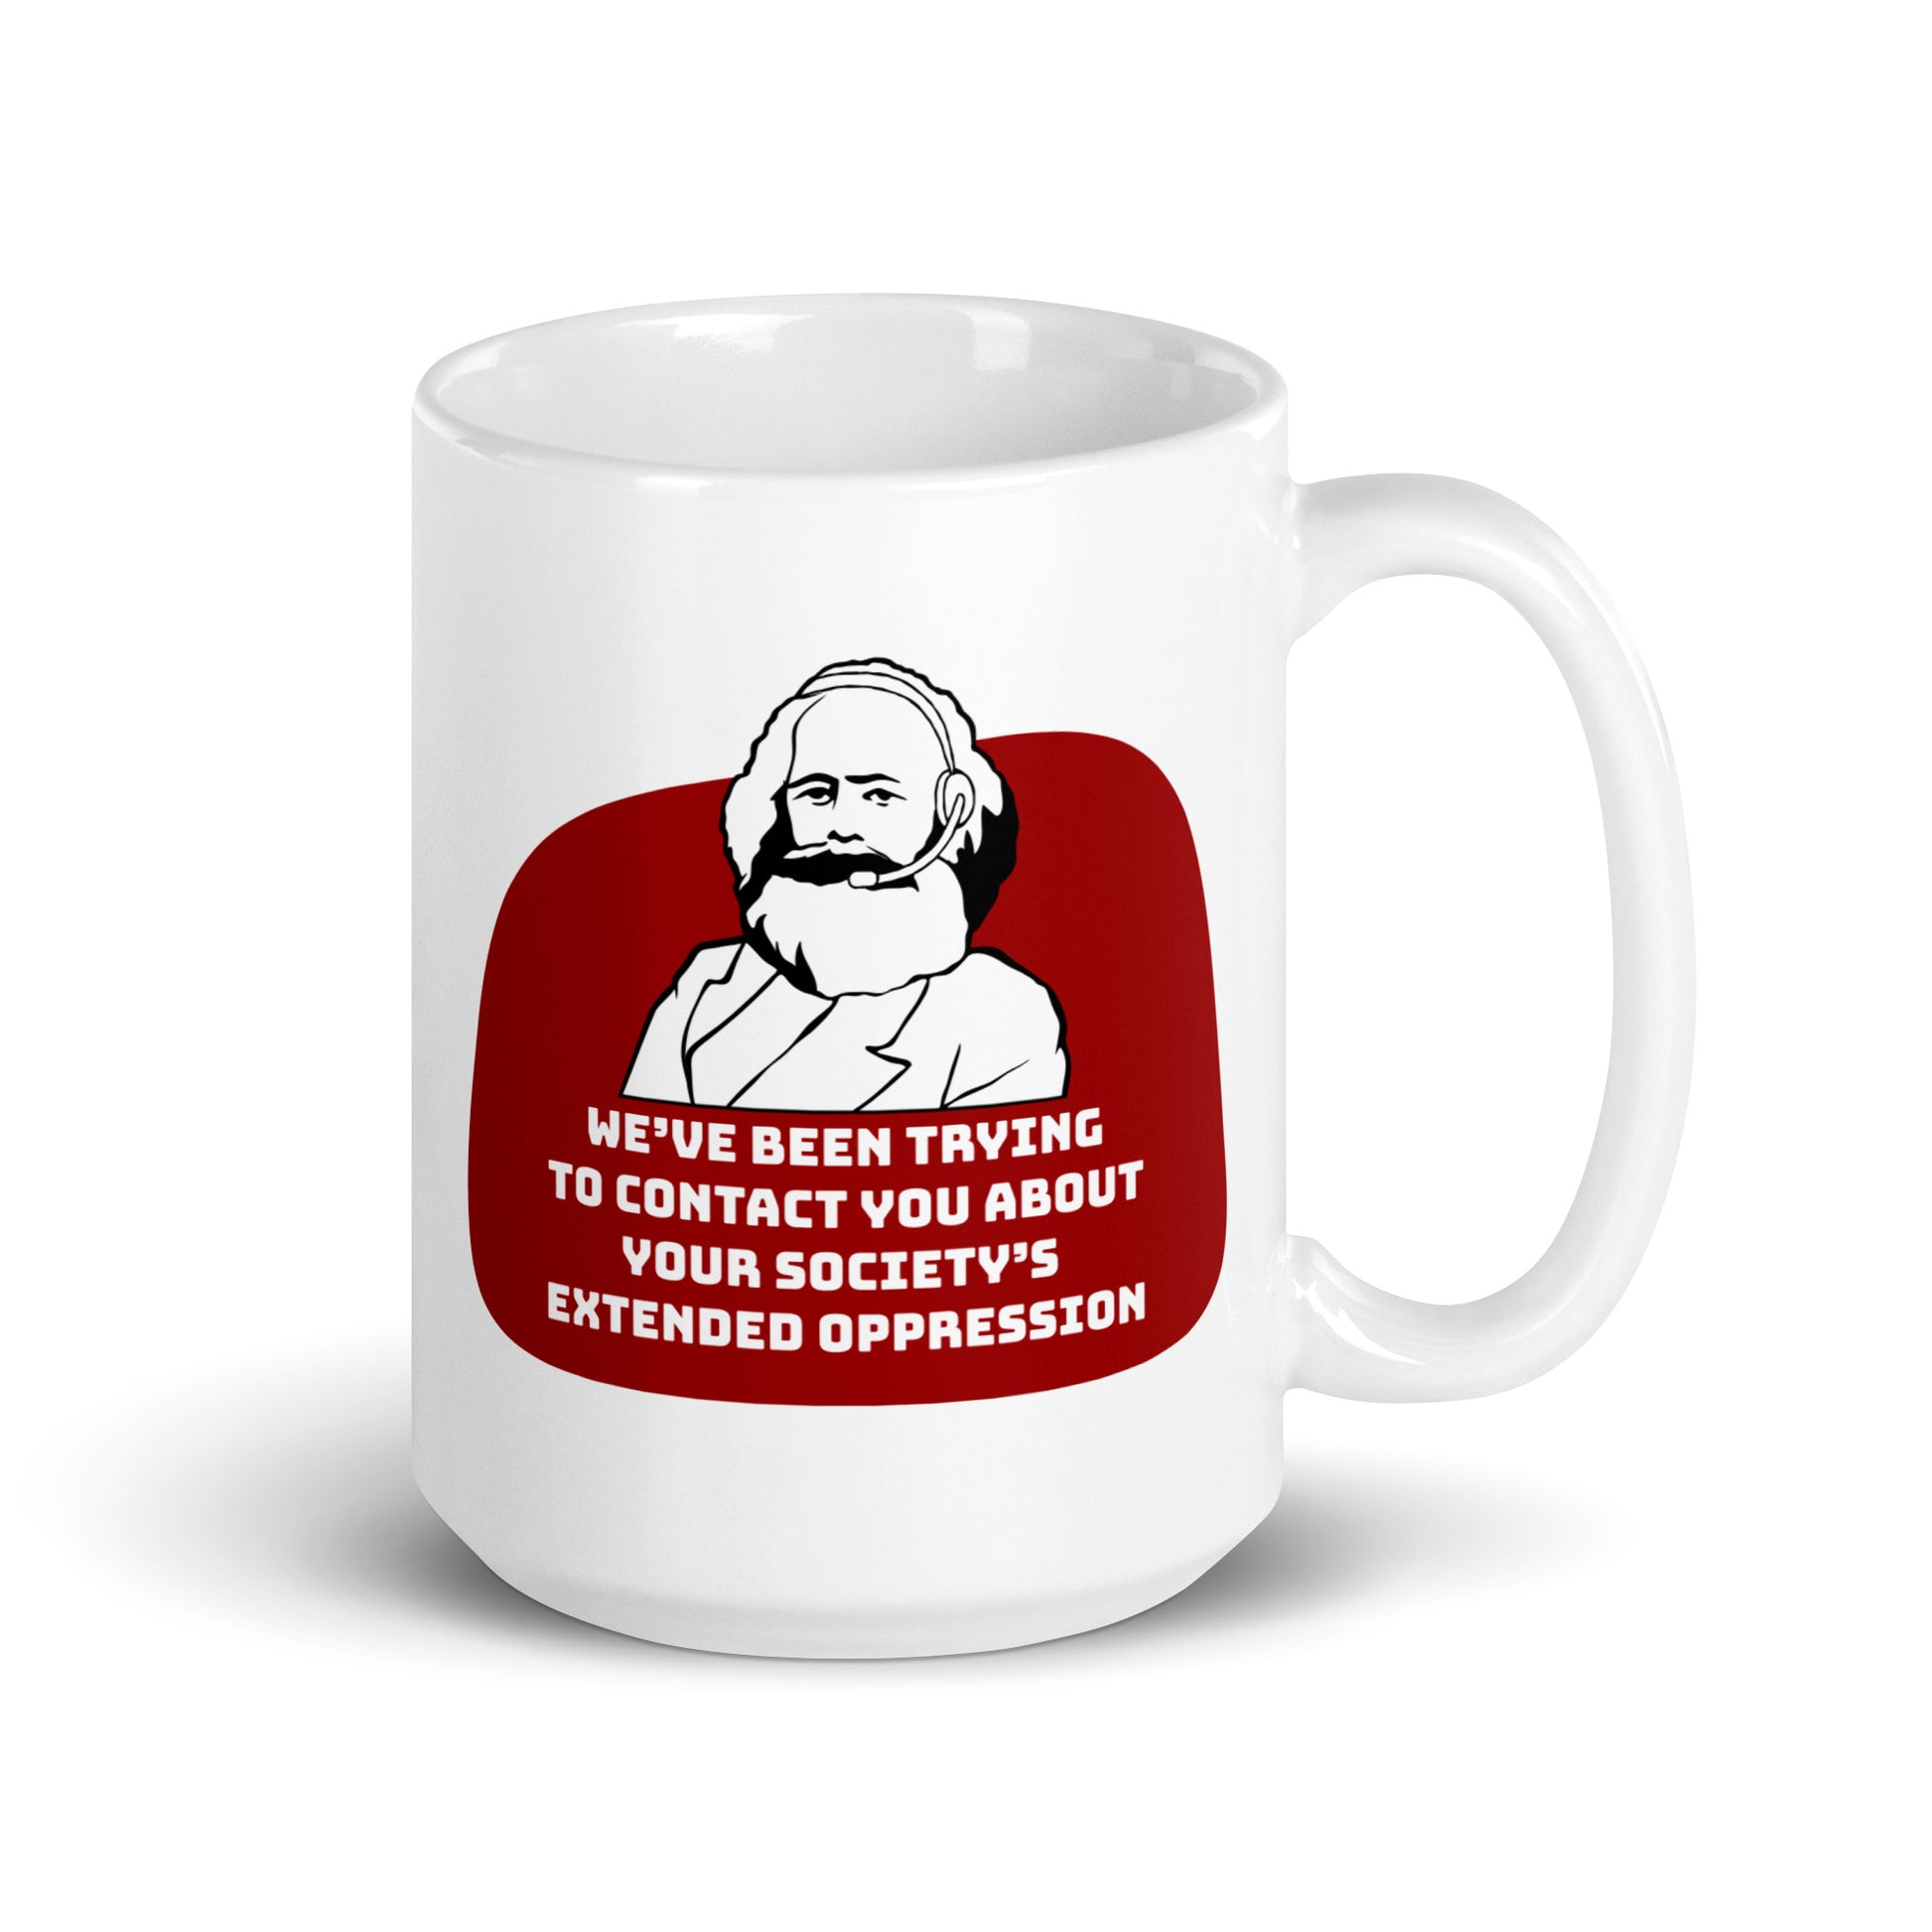 A 15 ounce, white ceramic mug featuring a black and white illustration of Karl Marx wearing a telemarketer headset. Text beneath Marx reads "We've been trying to contact you about your society's extended oppression." in a blocky font.